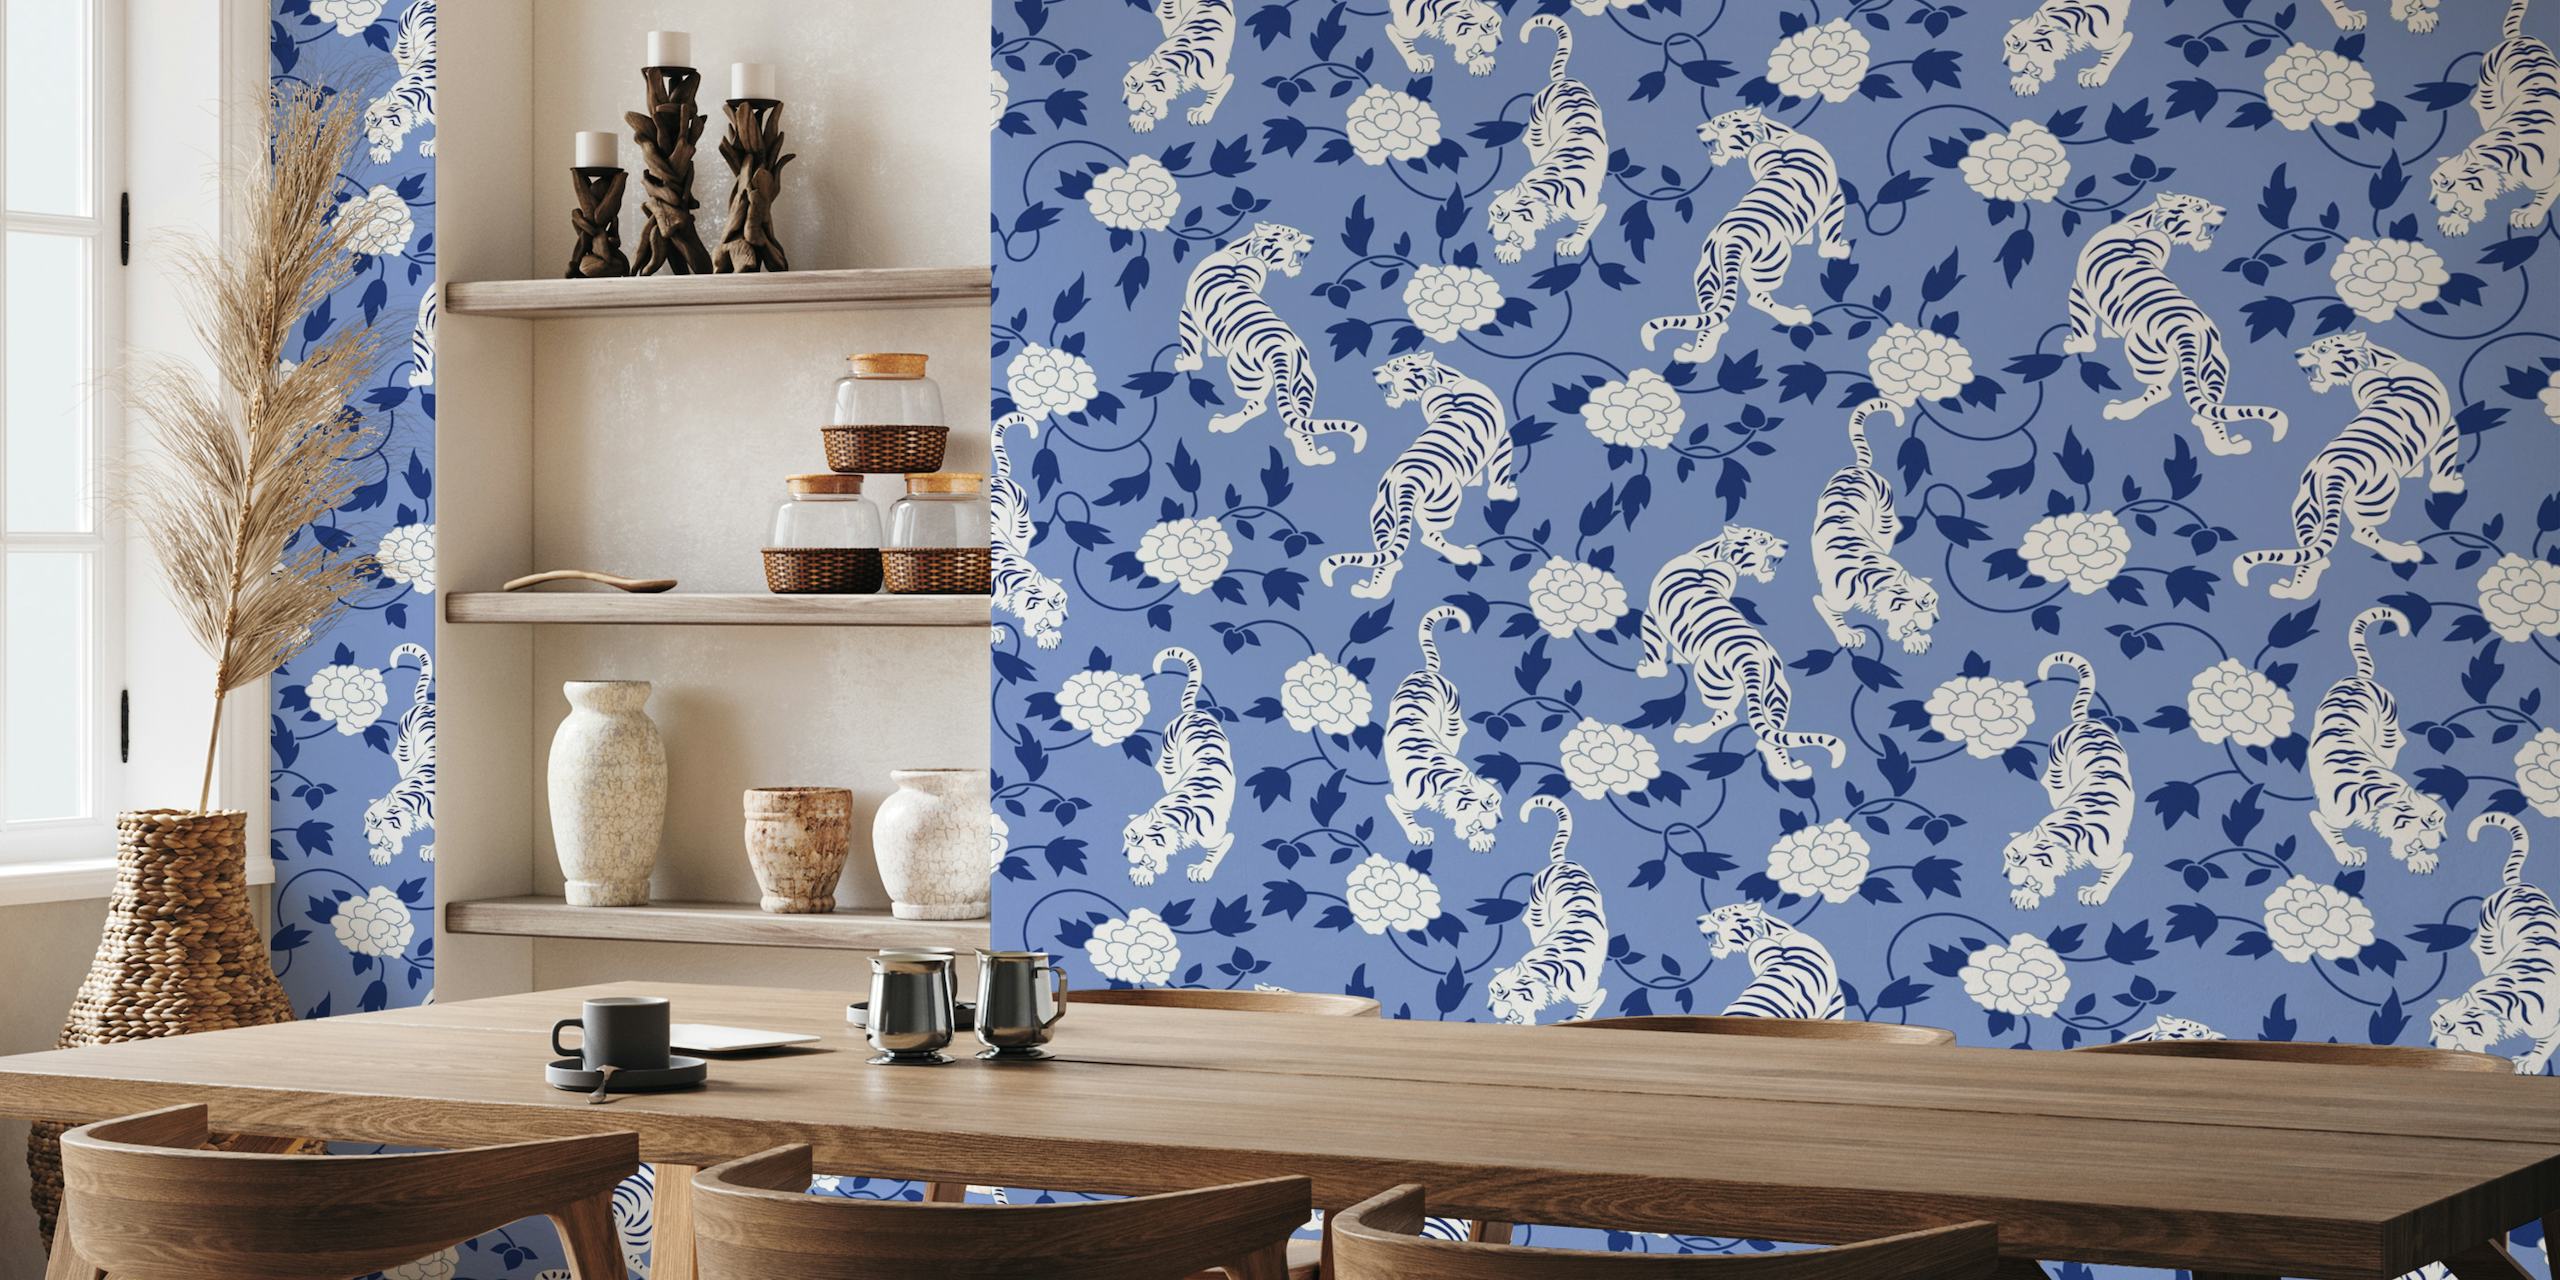 Blue Asian Chinoiserie wall mural with white tigers and florals